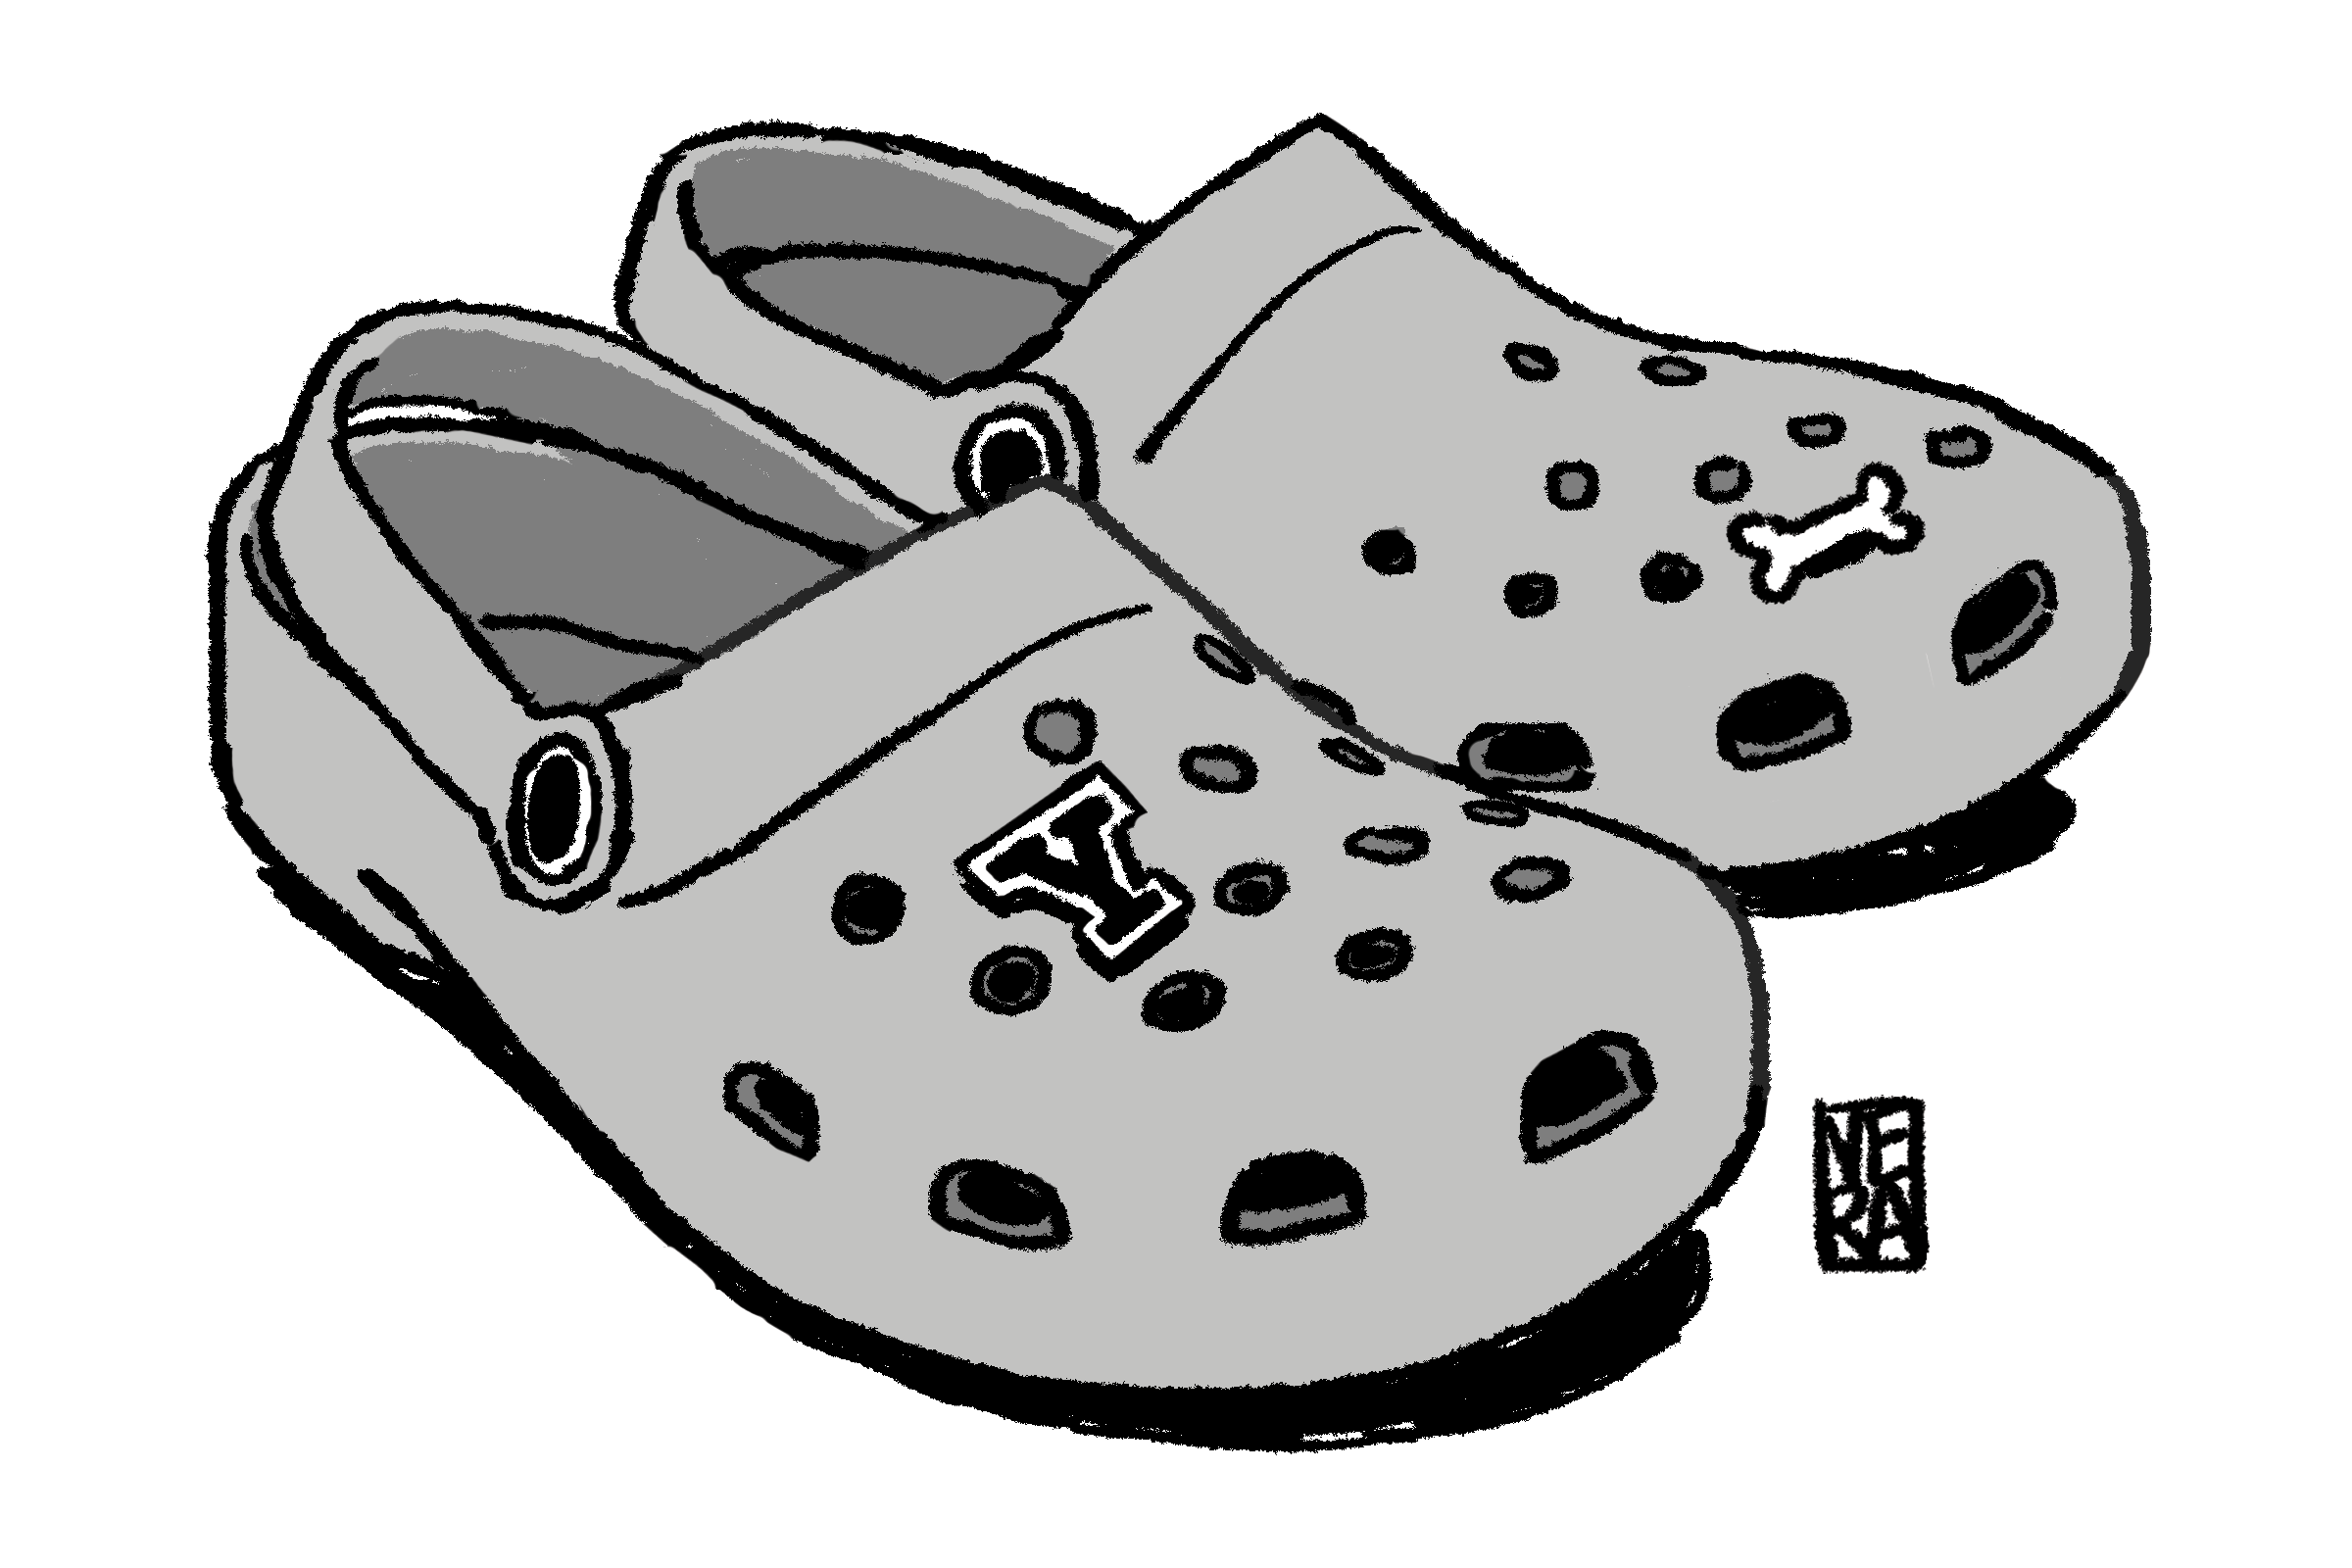 Missionær telt mindre In Defense of Crocs - Yale Daily News